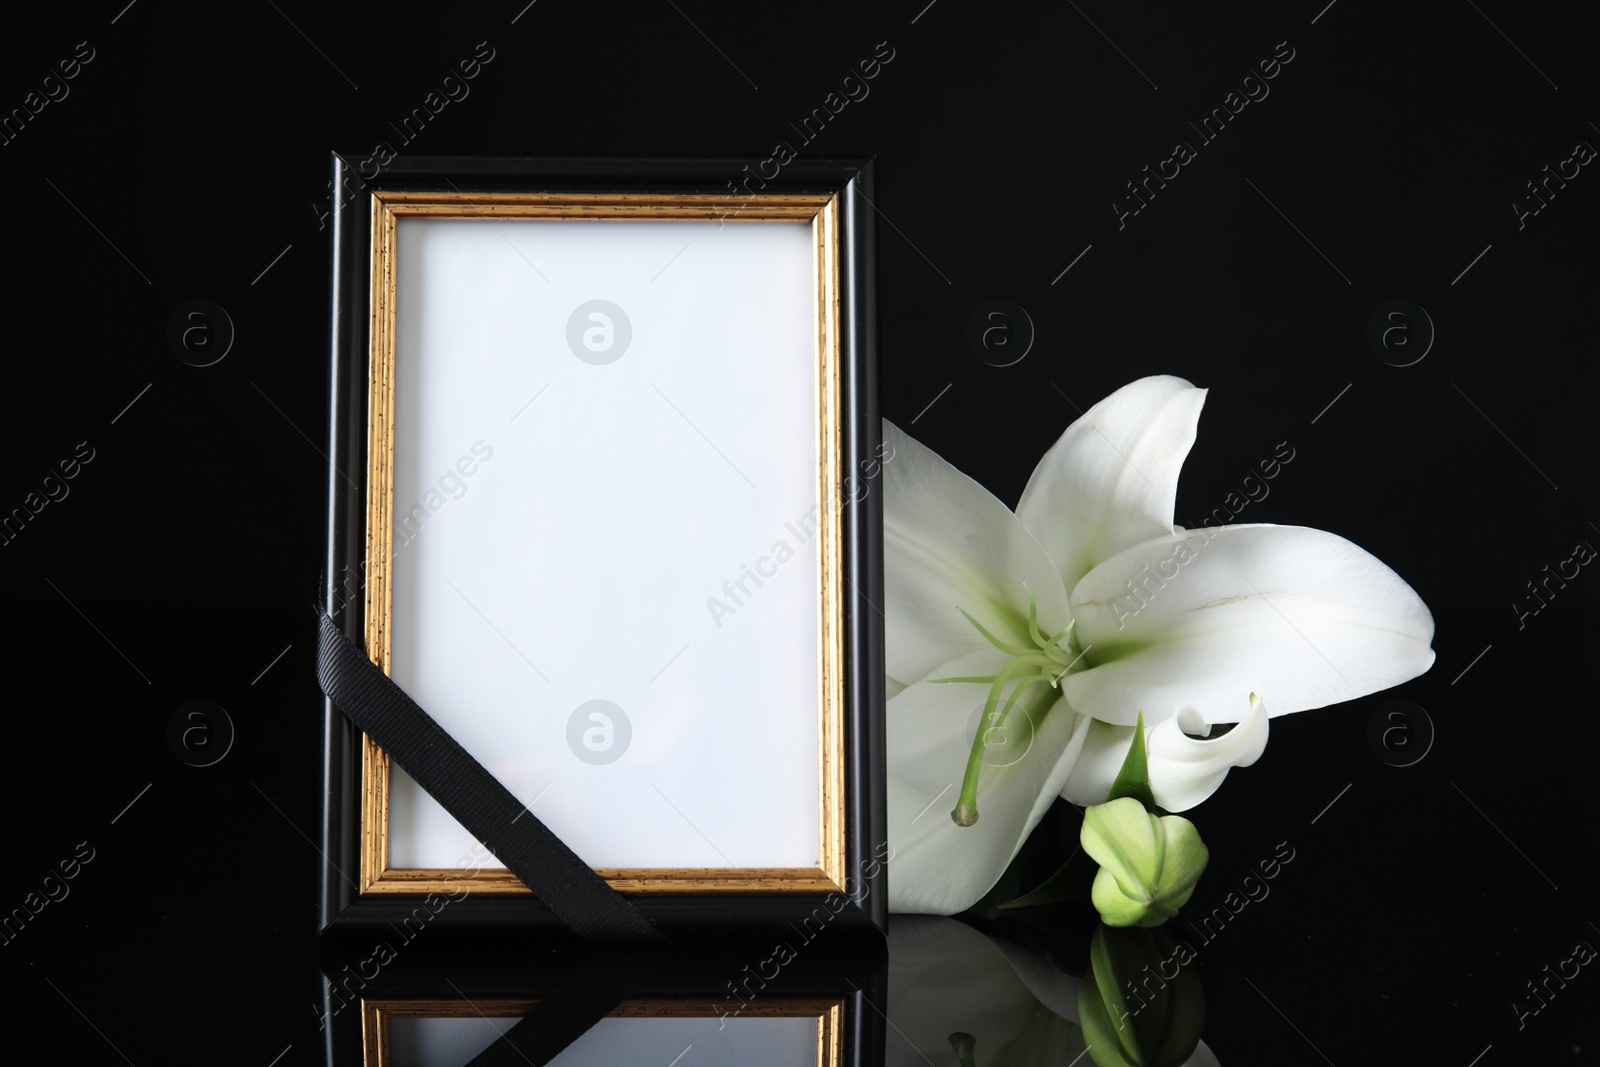 Photo of Funeral photo frame with ribbon and white lily on black table against dark background. Space for design